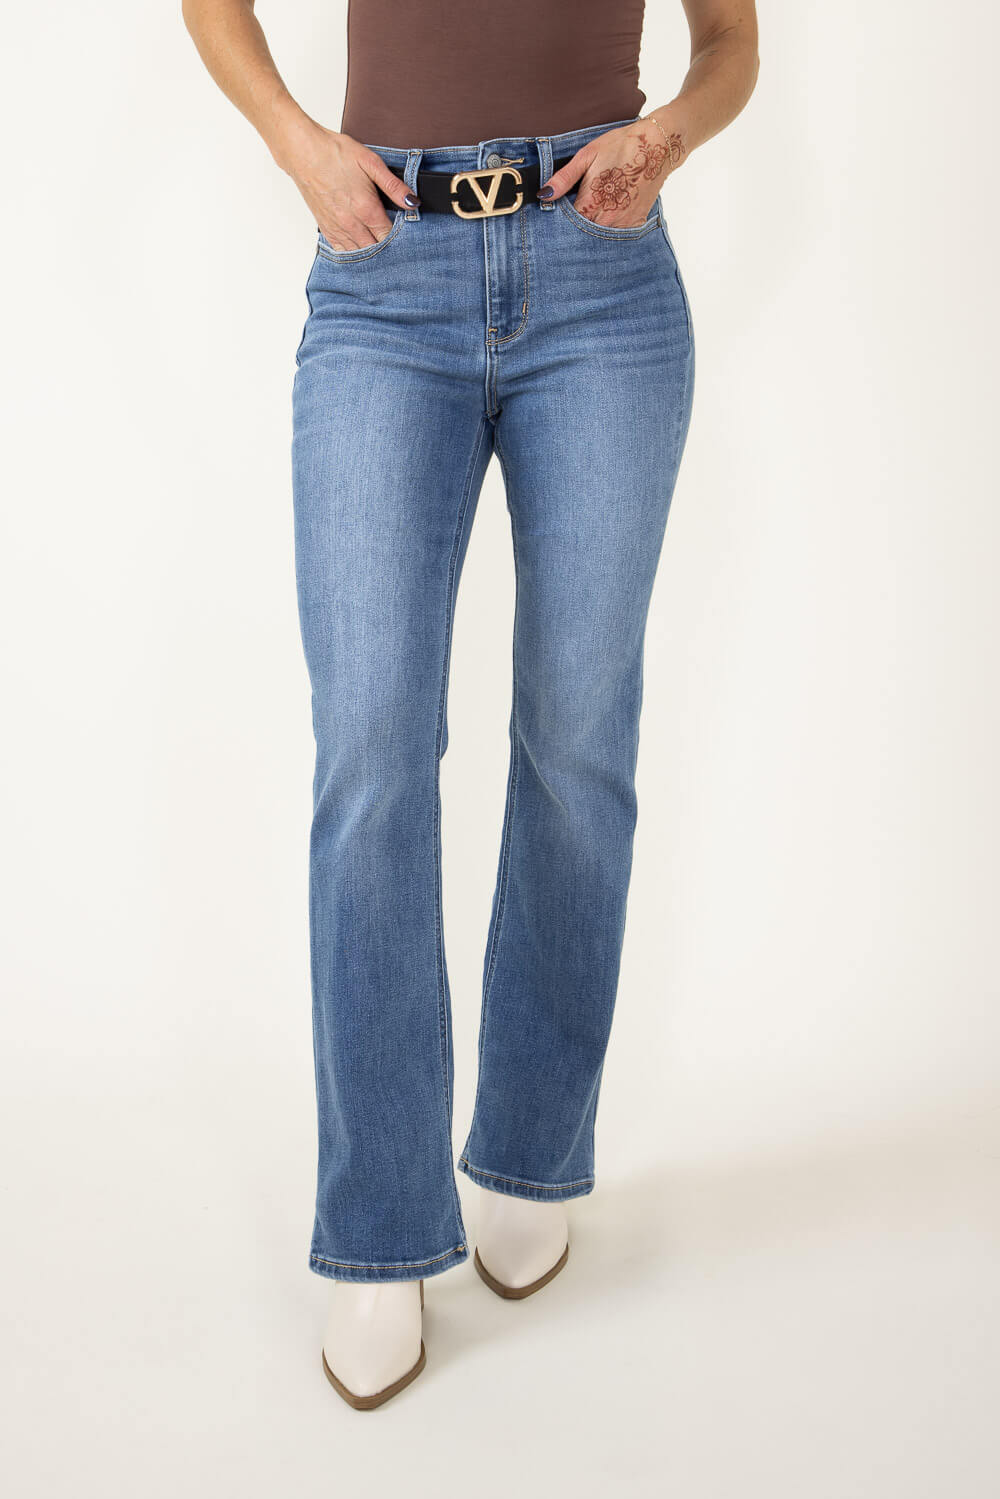 Judy Blue High Rise Dyed Front Seam Straight Jeans for Women in